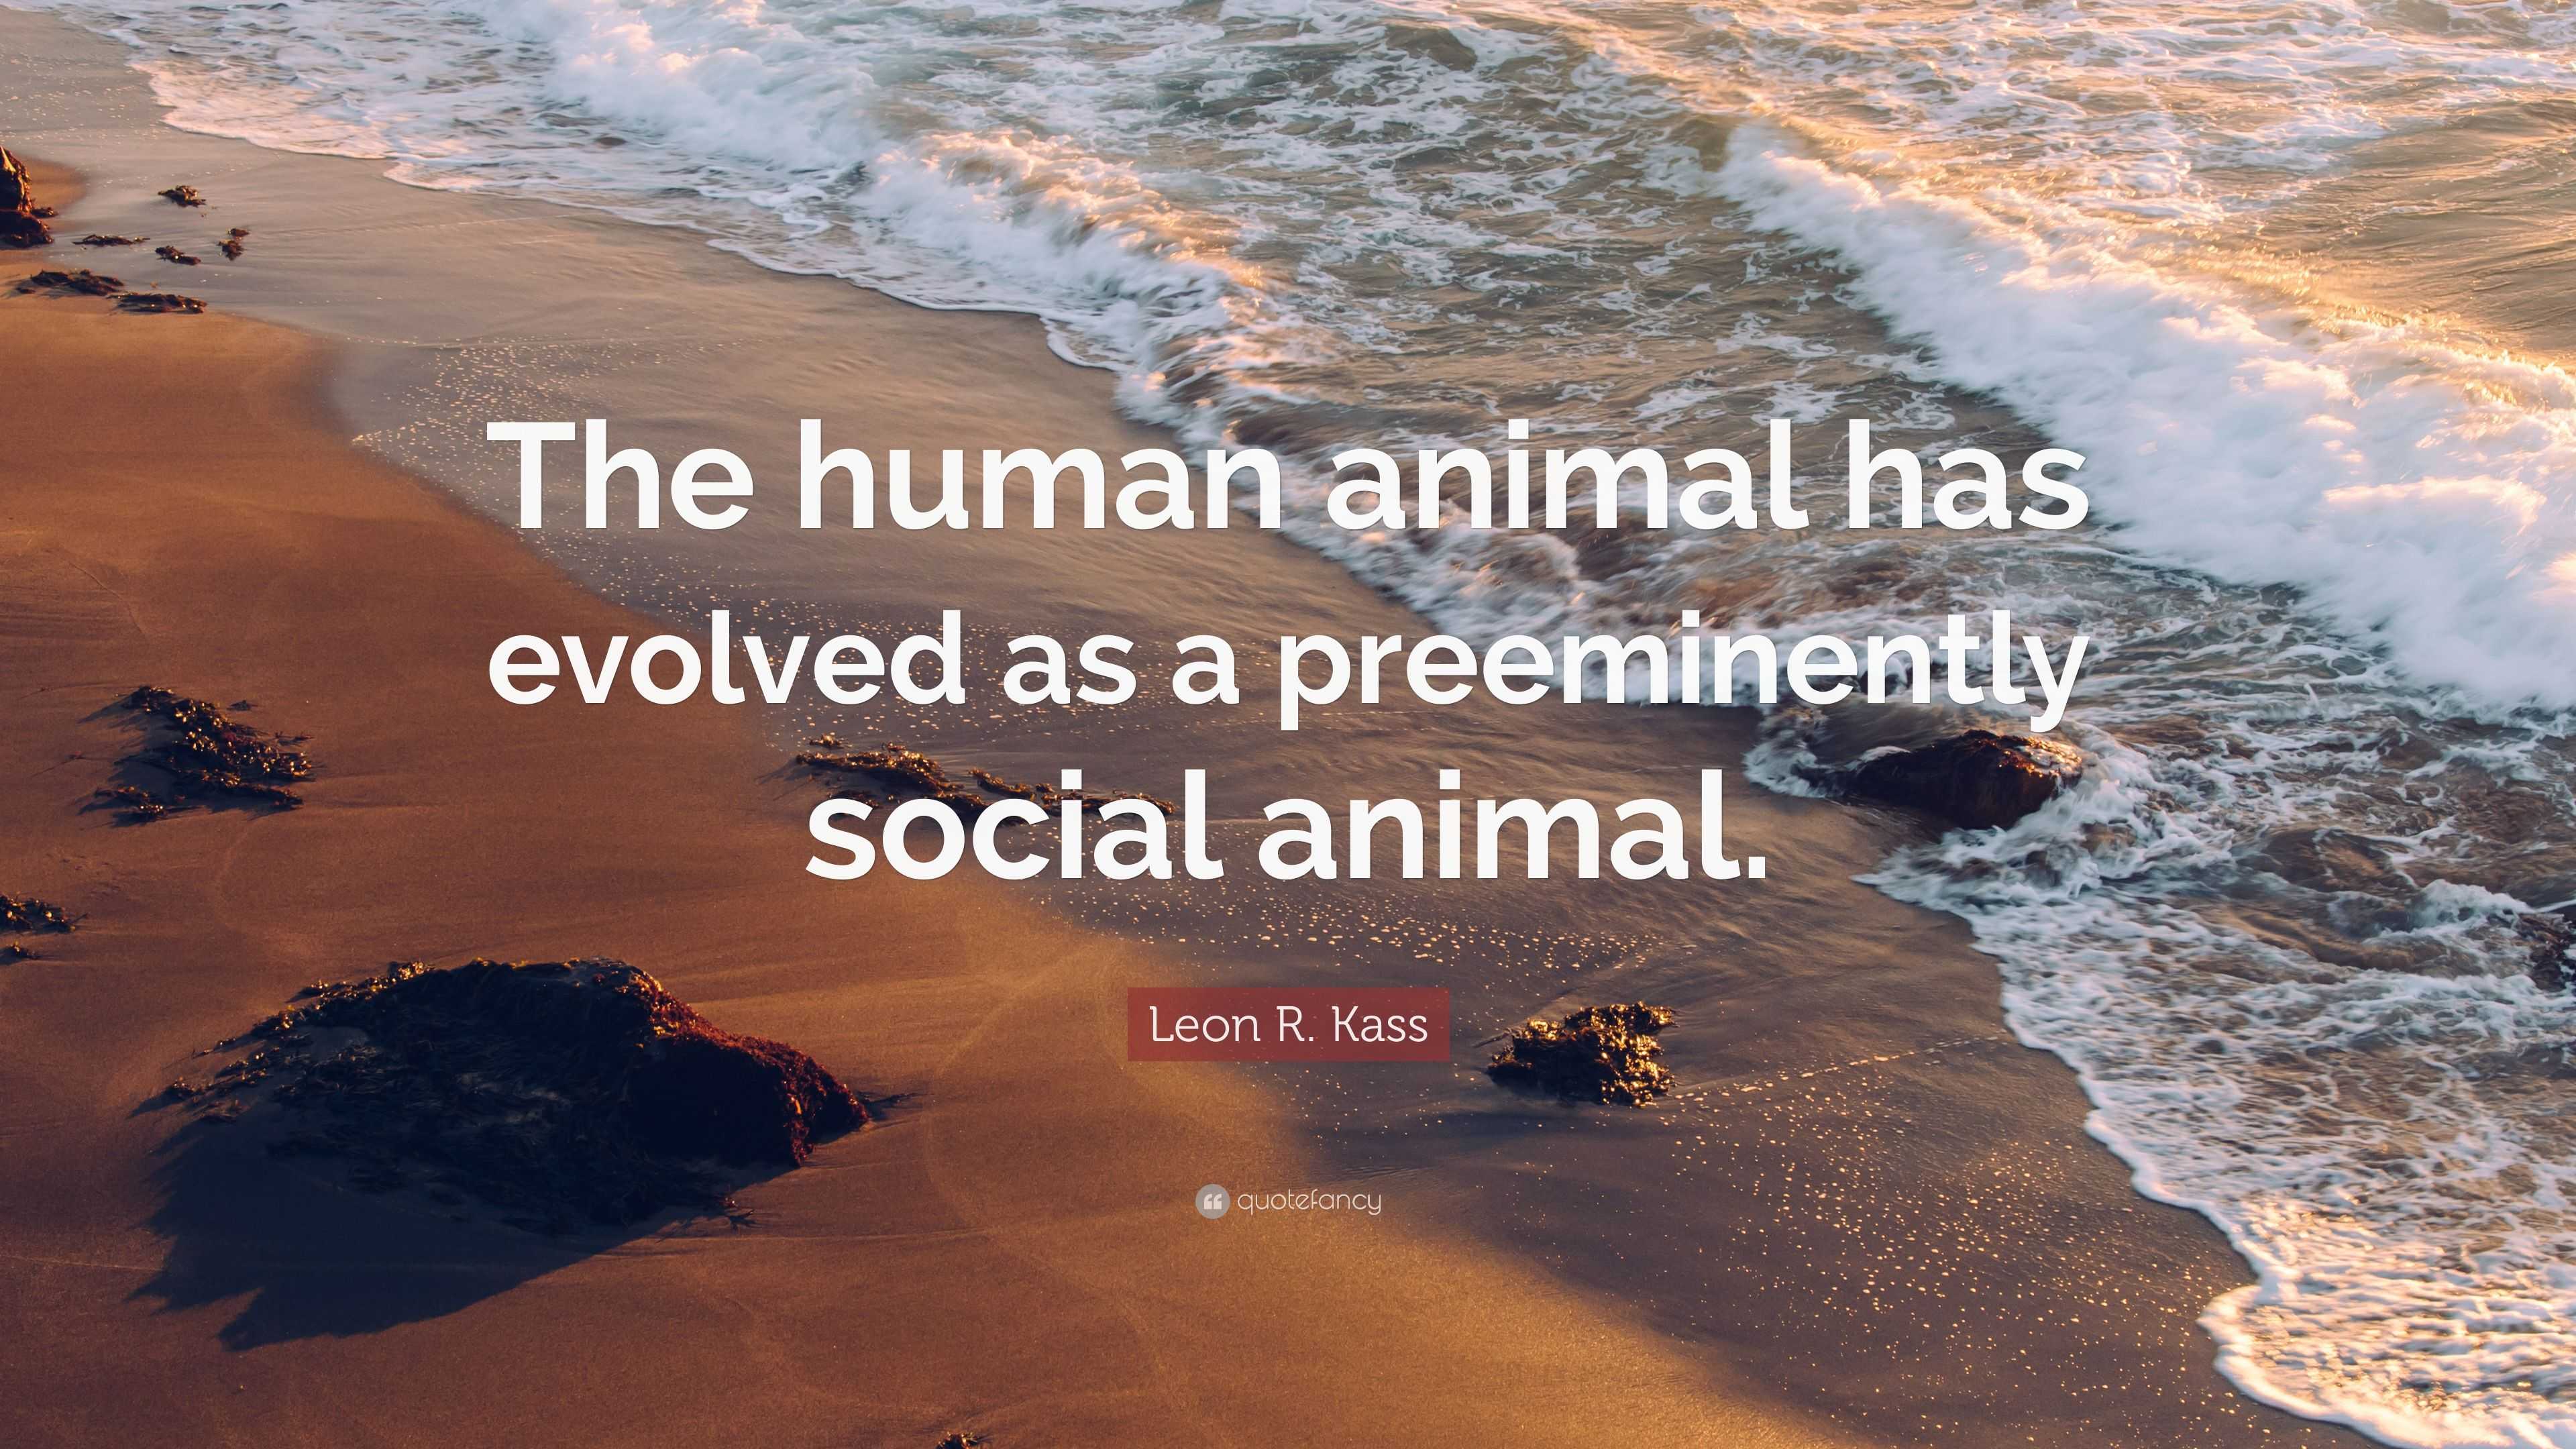 Leon R. Kass Quote: “The human animal has evolved as a preeminently social  animal.”